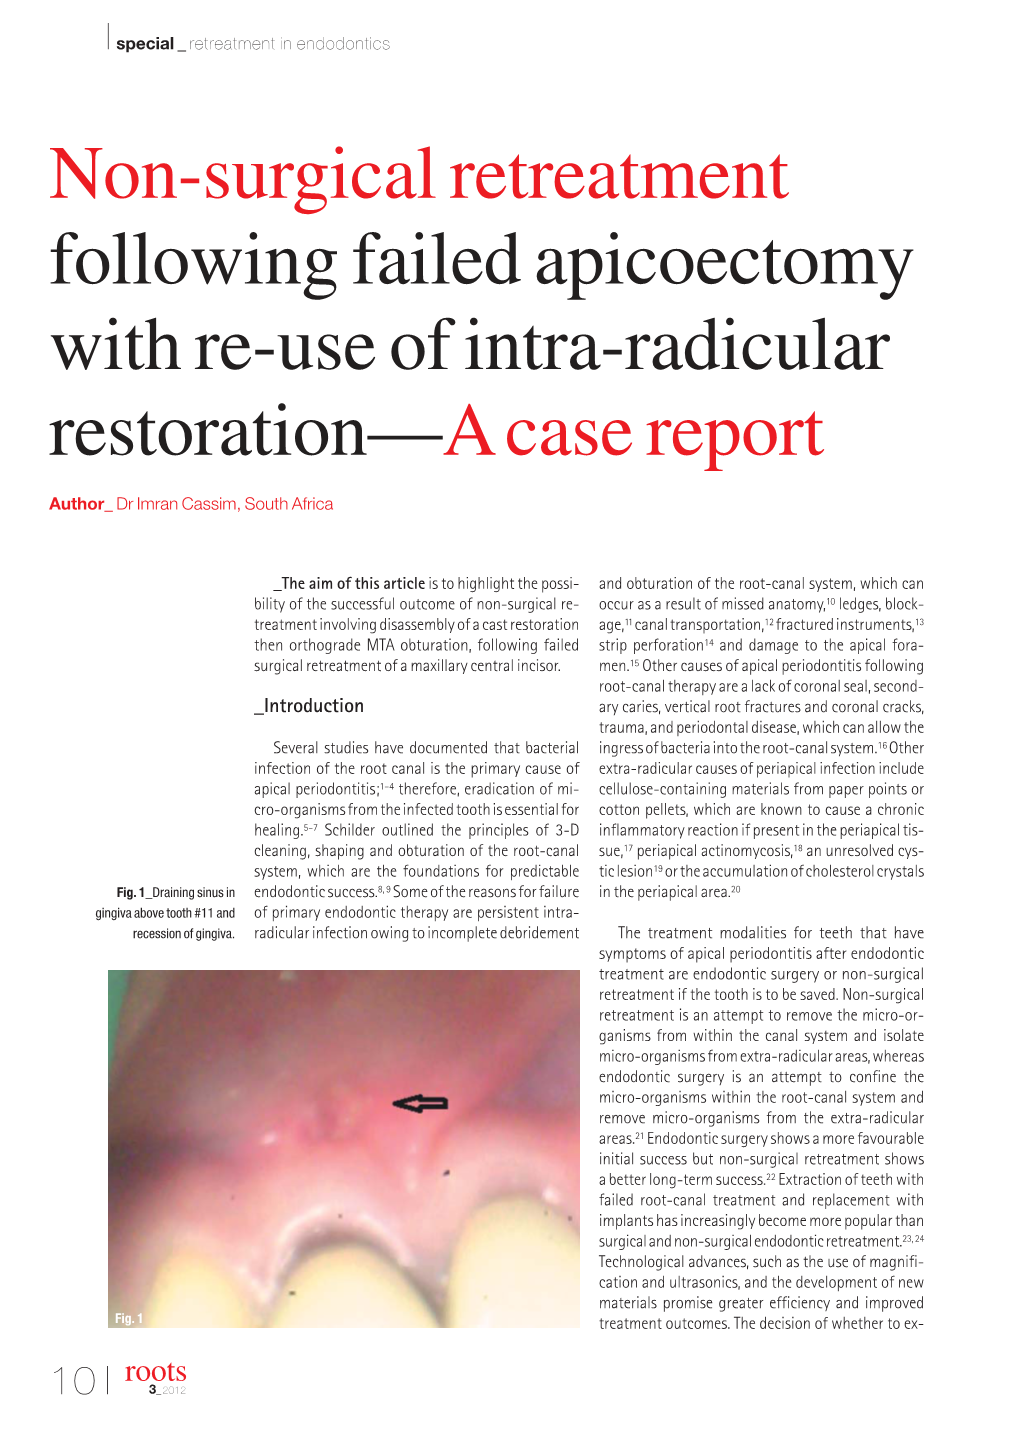 Non-Surgical Retreatment Following Failed Apicoectomy with Re-Use of Intra-Radicular Restoration—A Case Report